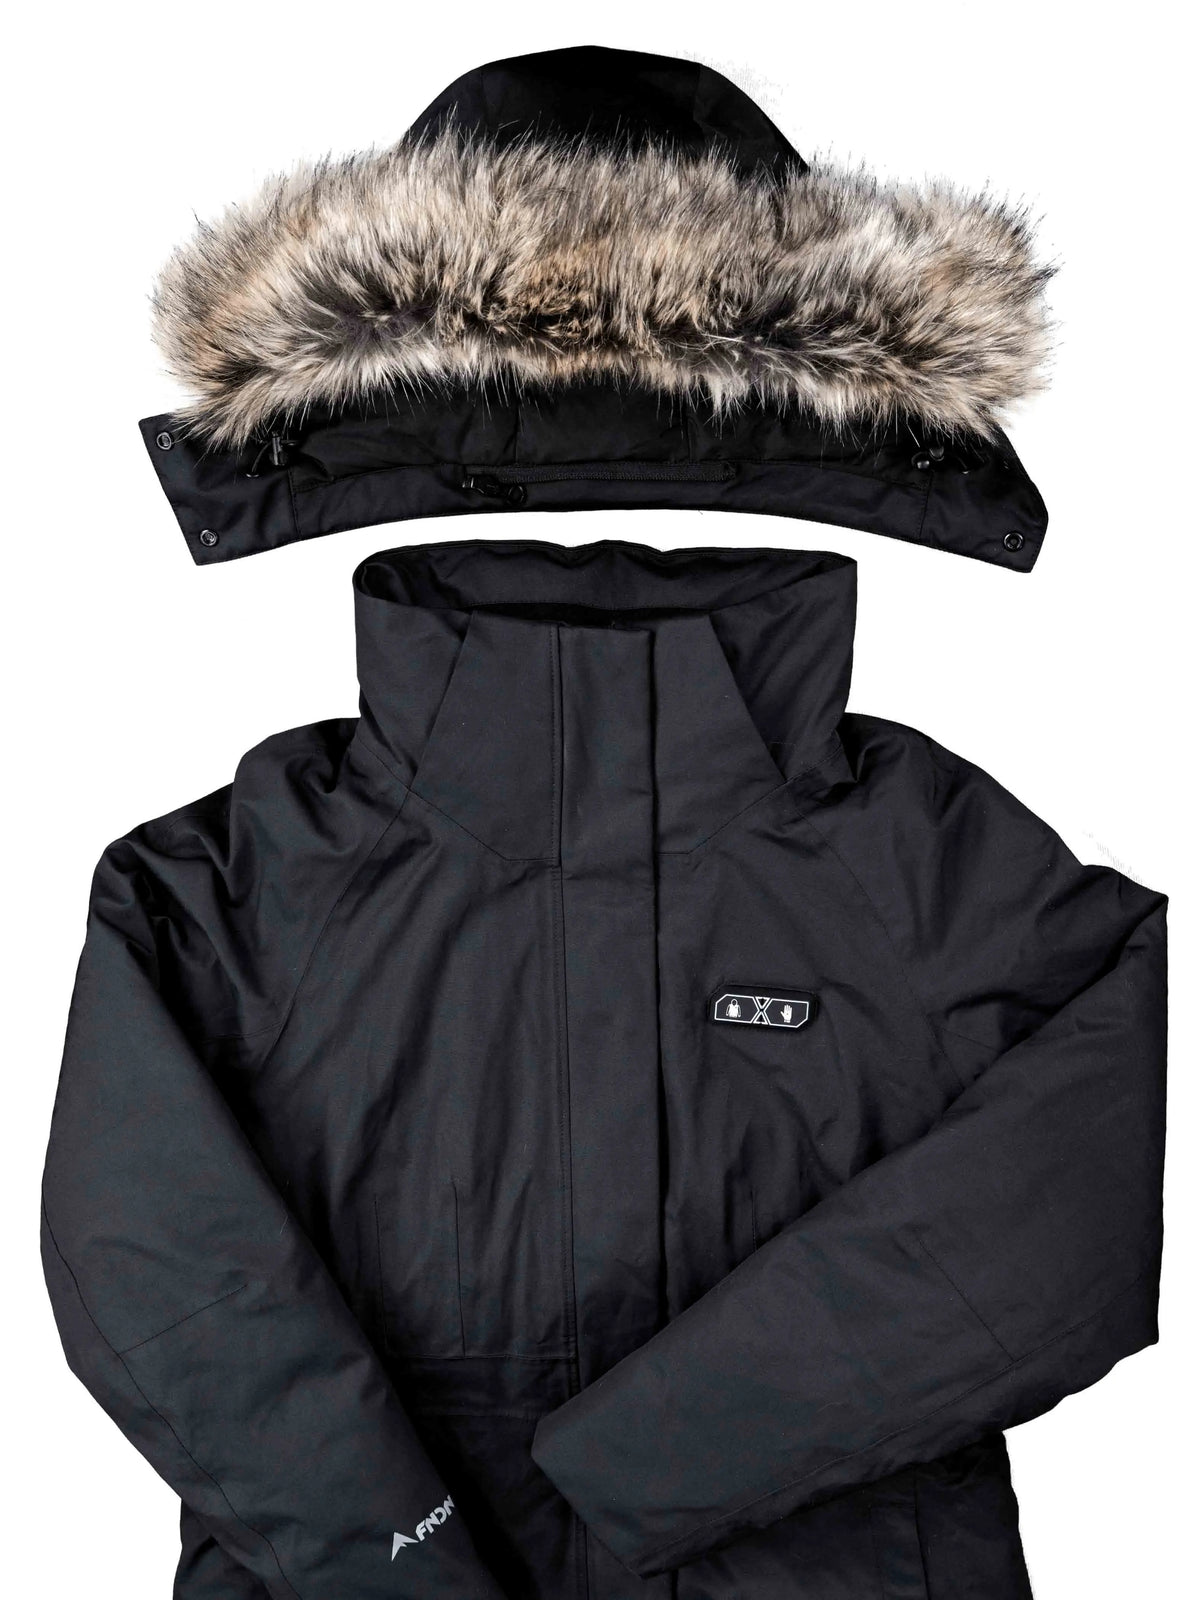 FNDN Women’s Heated Parka with Built-in Heated Gloves